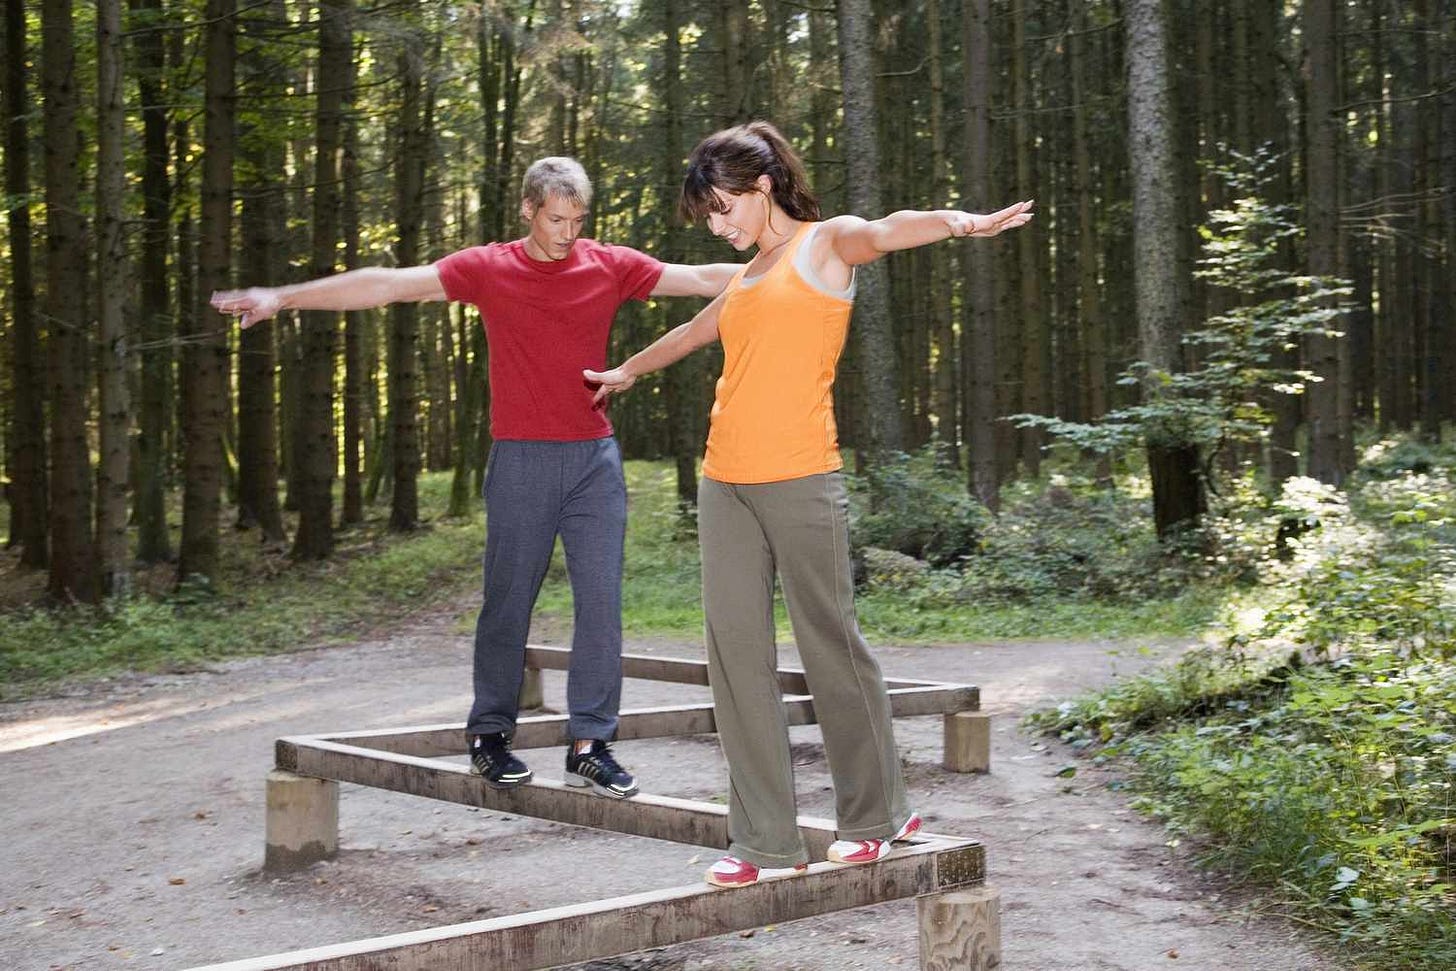 10 Fun Ways to Add Balance Exercises to Your Walks